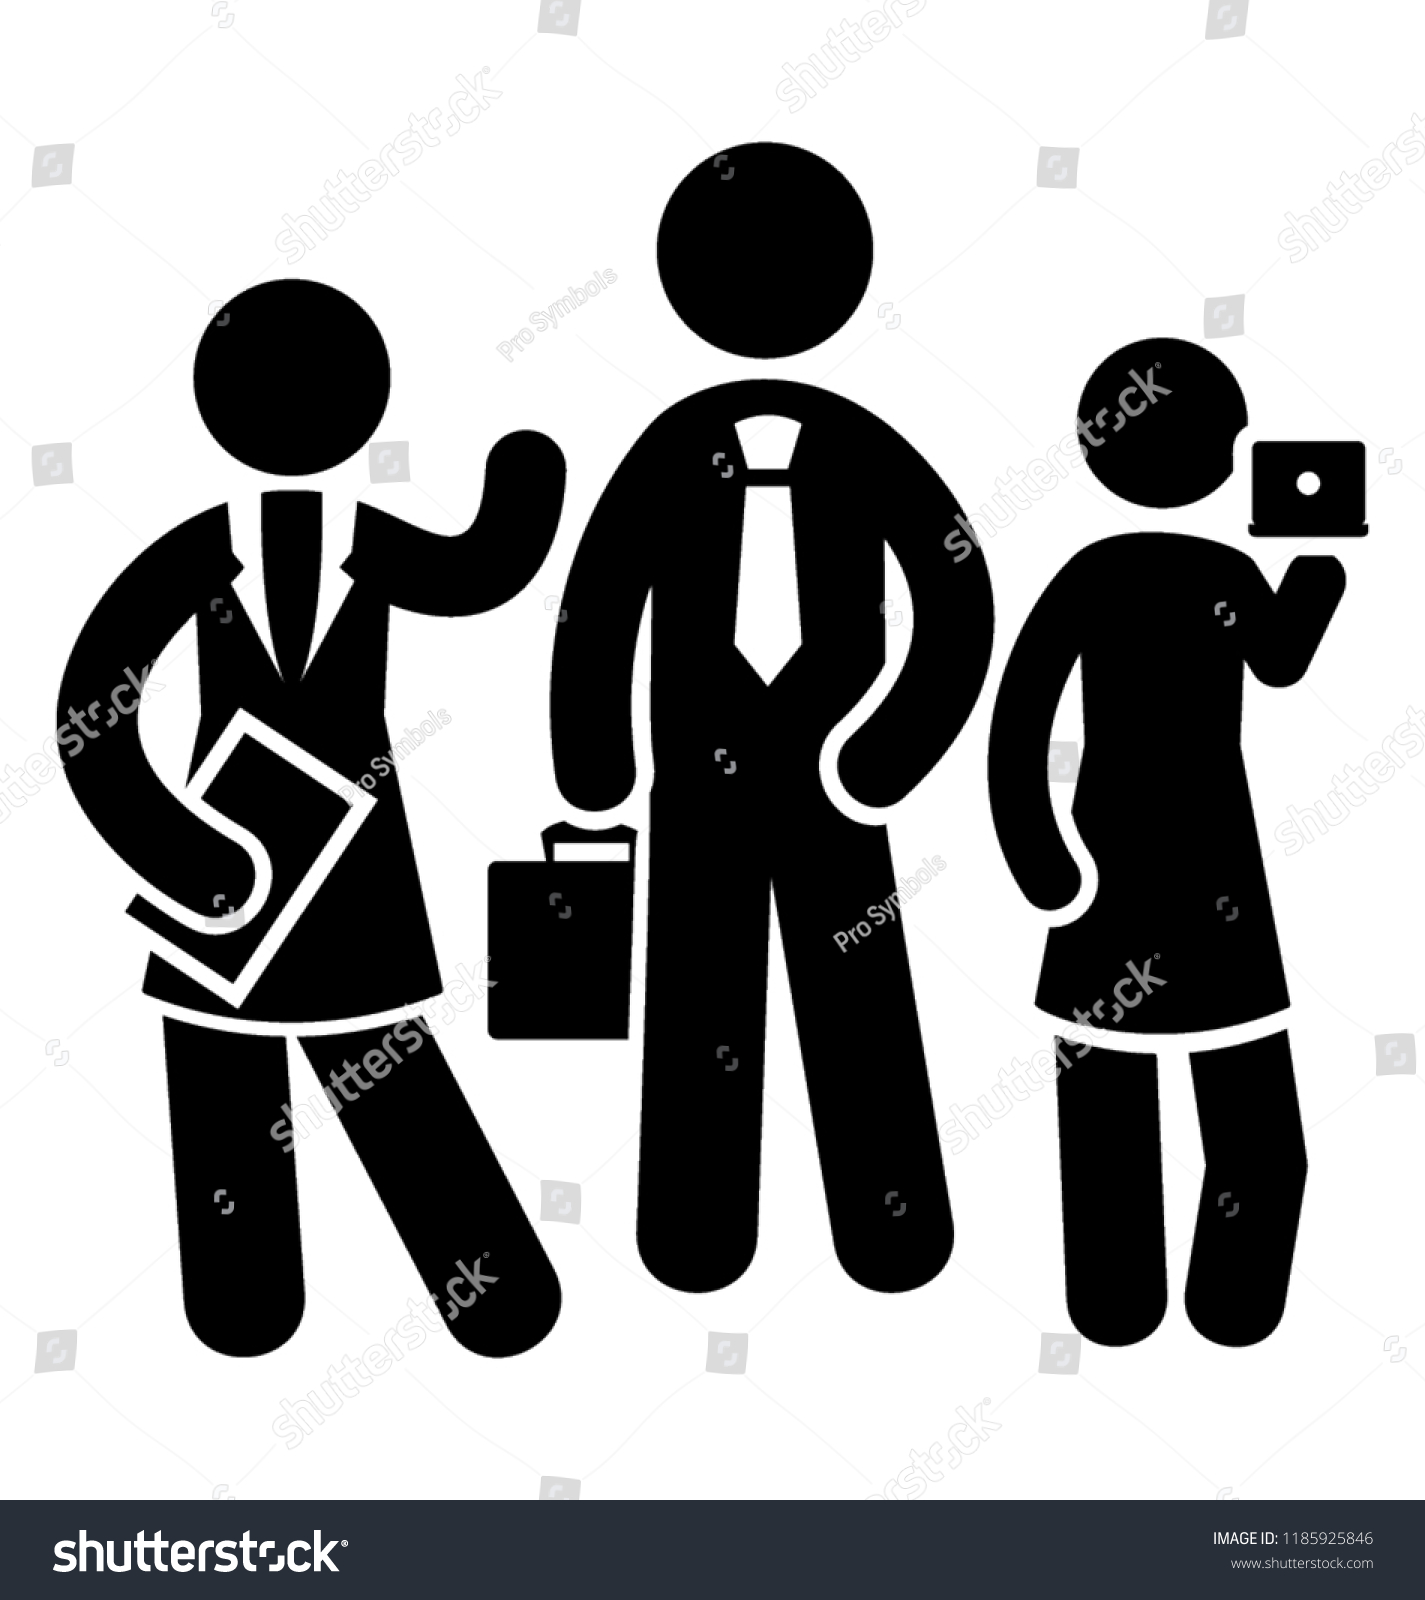 Team building illustration of staff member in a formal appearance #1185925846